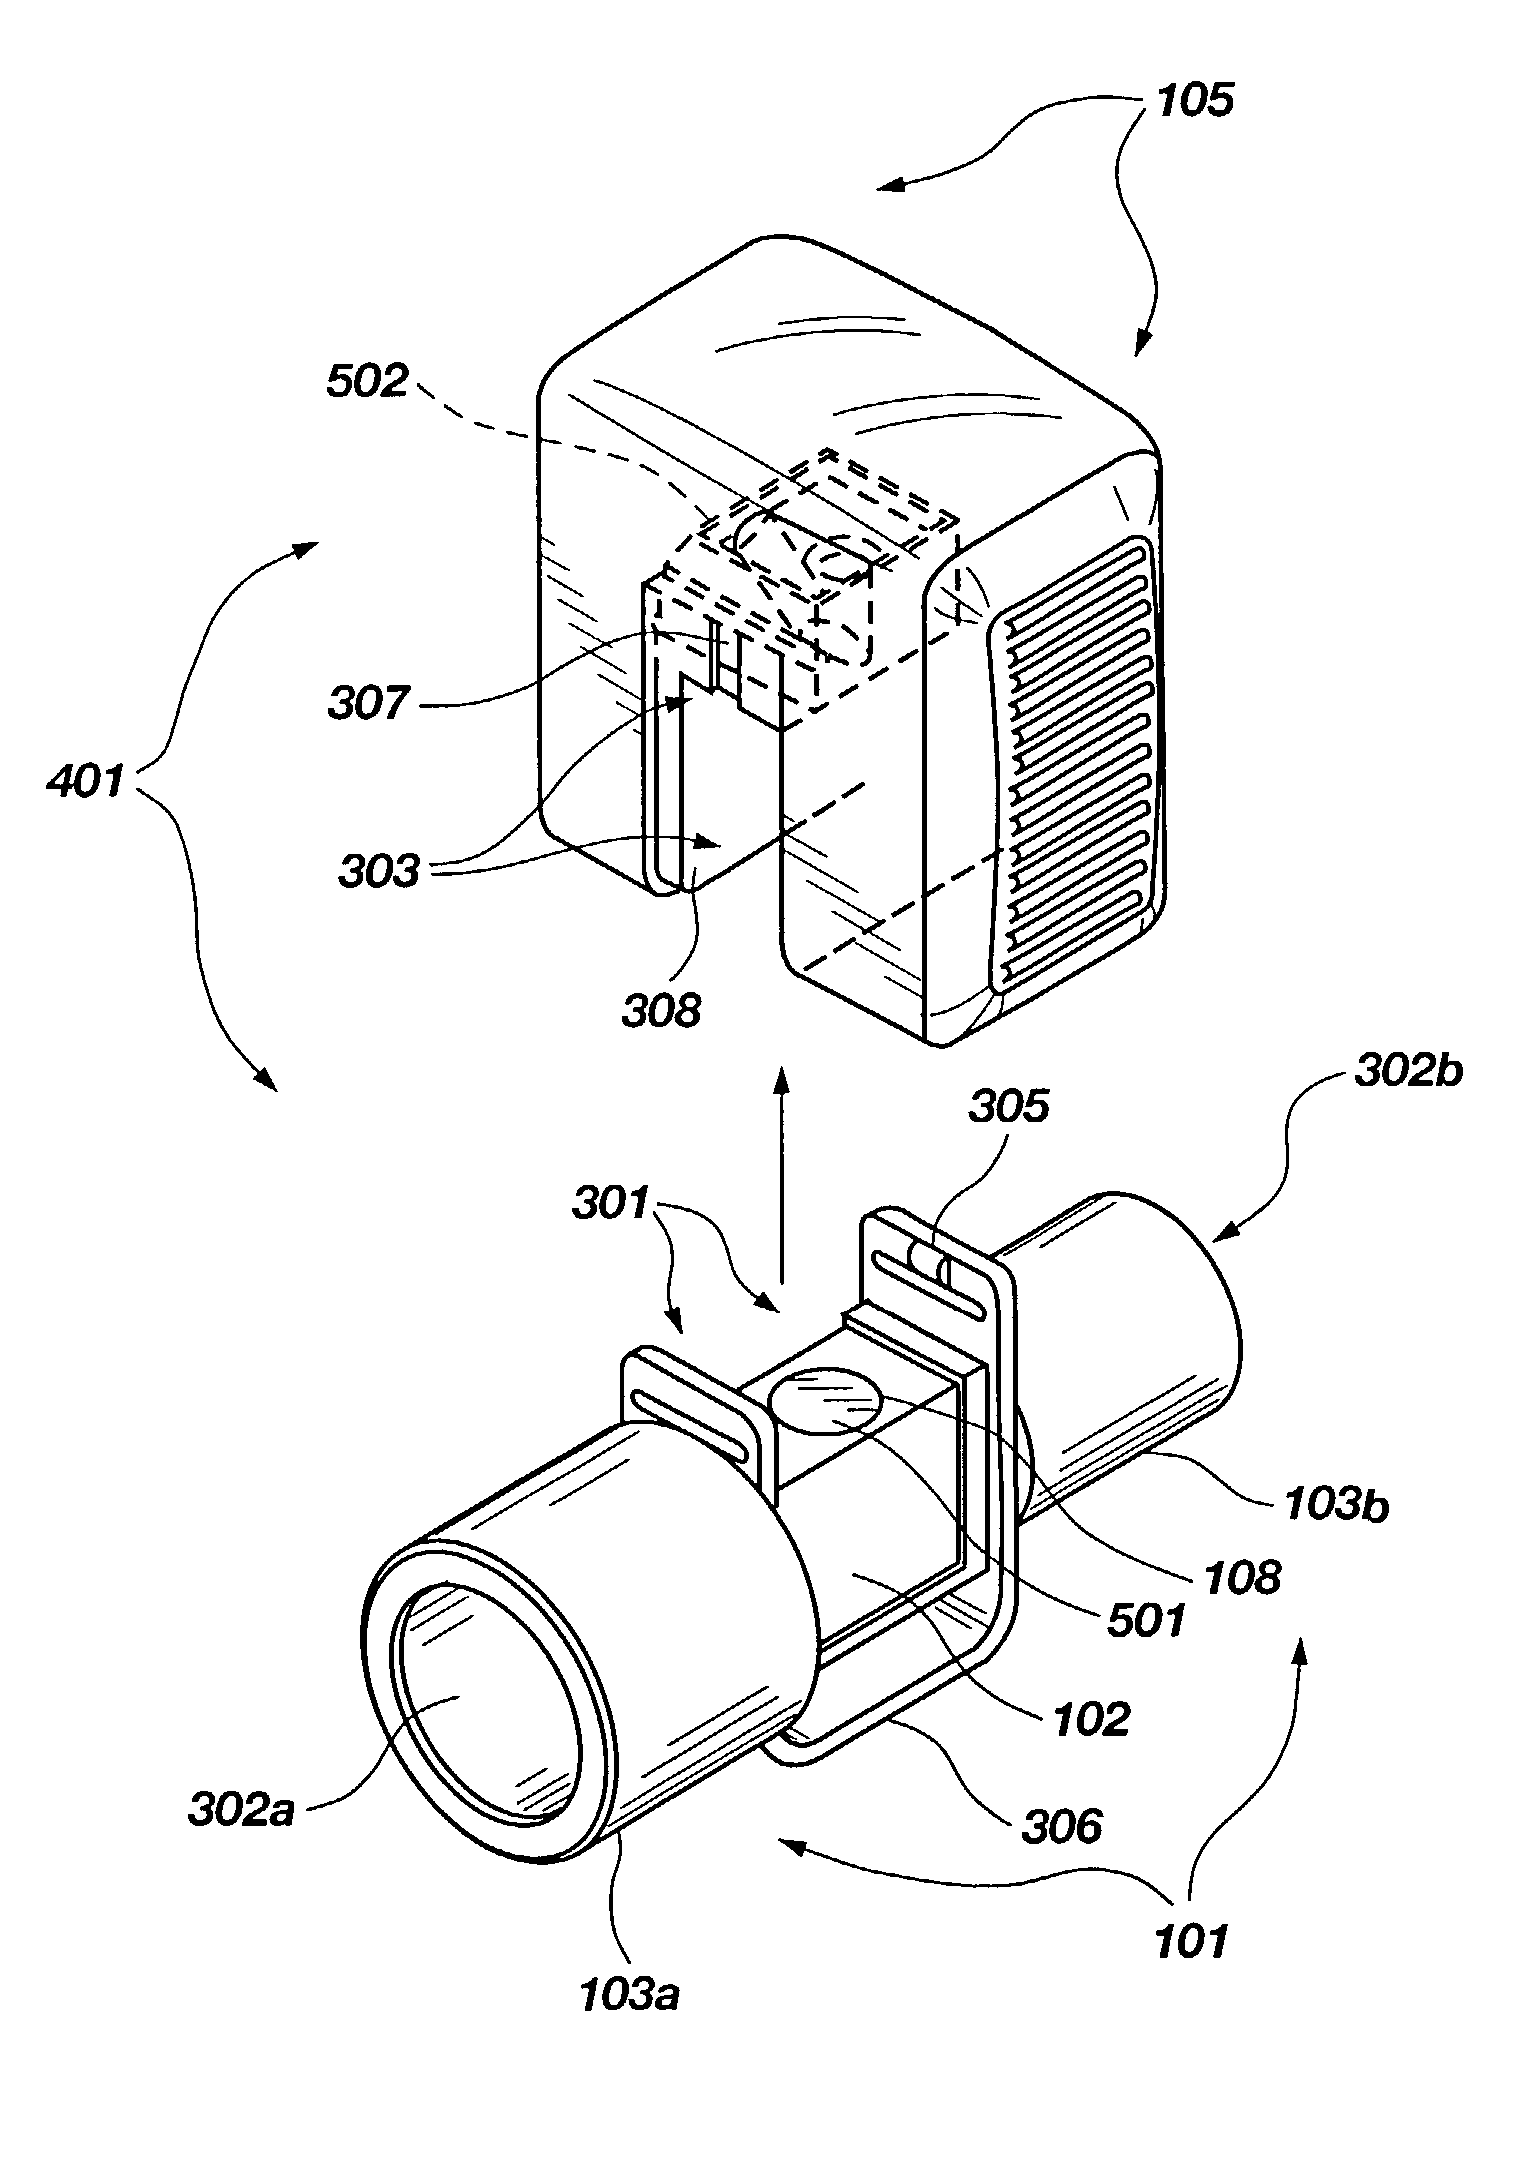 Oxygen monitoring apparatus and methods of using the apparatus